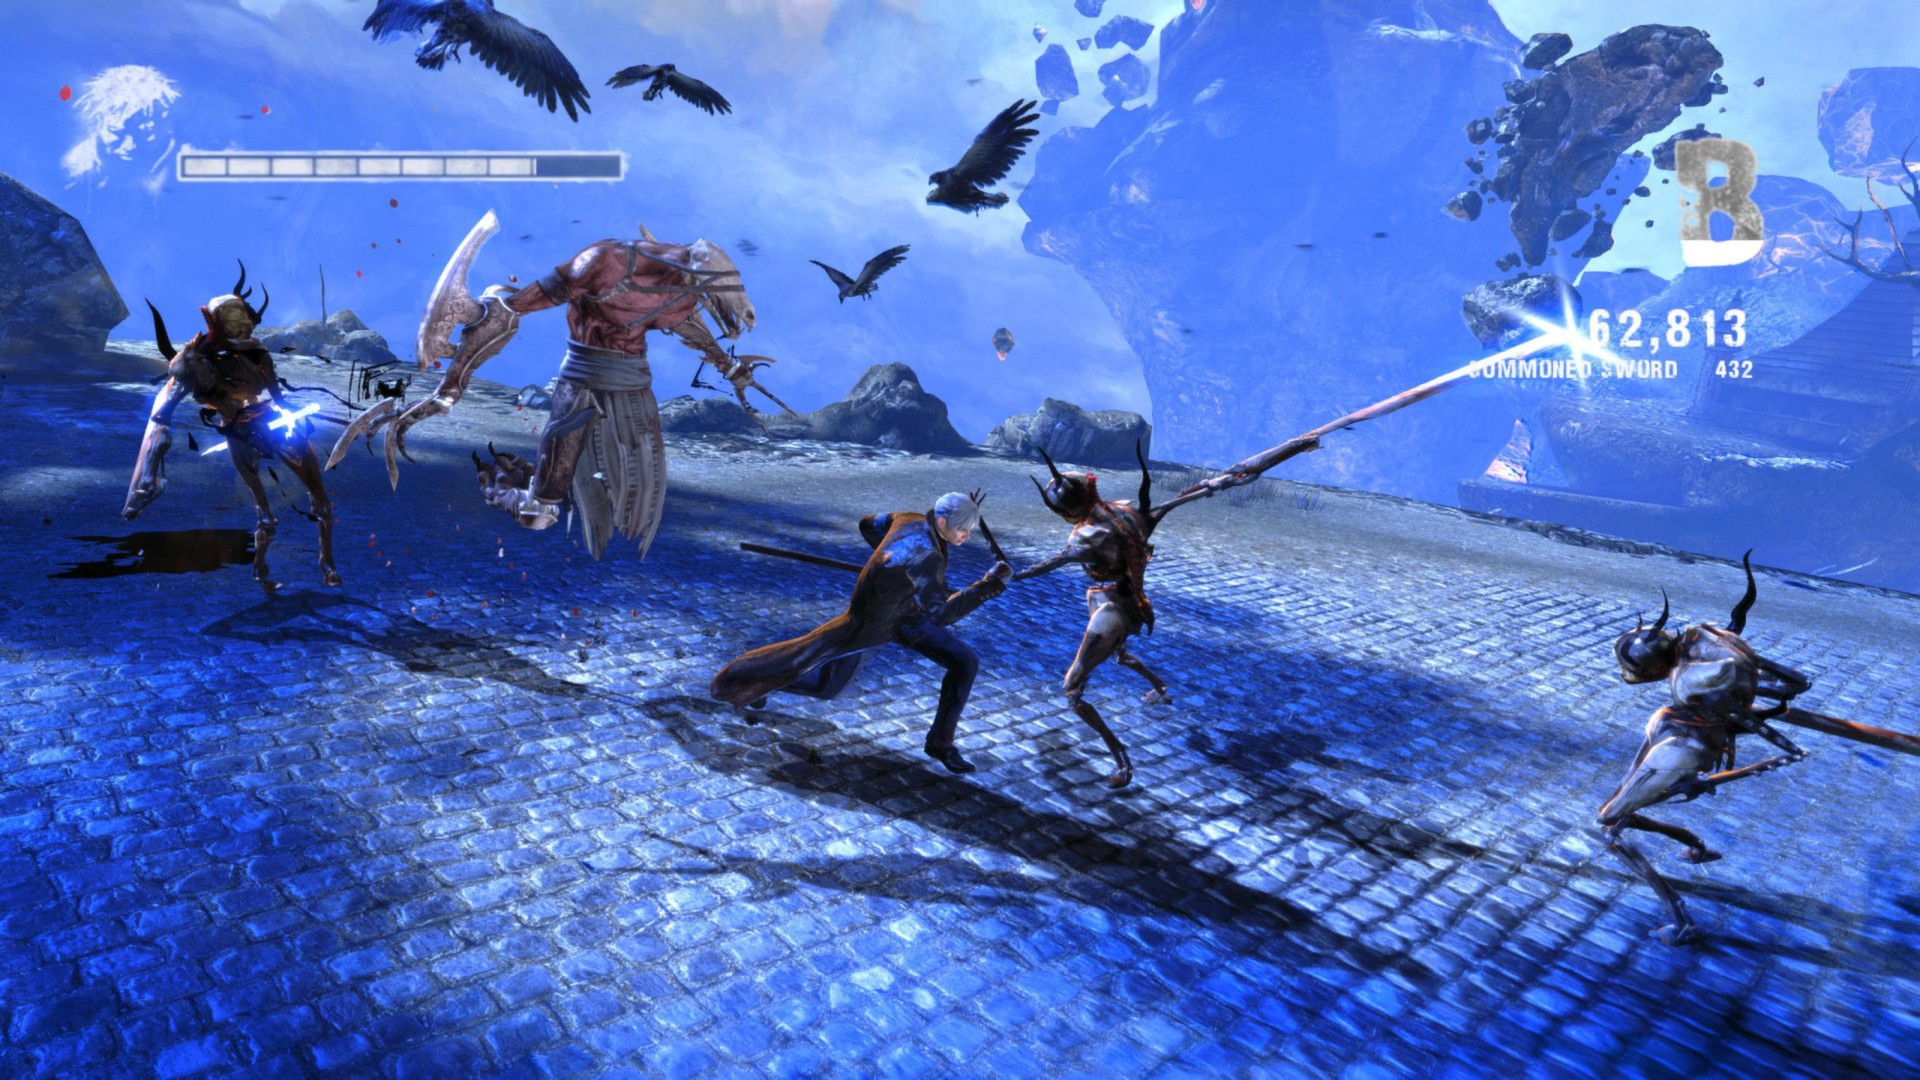 Play as Dante's twin brother in DmC's post launch DLC Vergil's